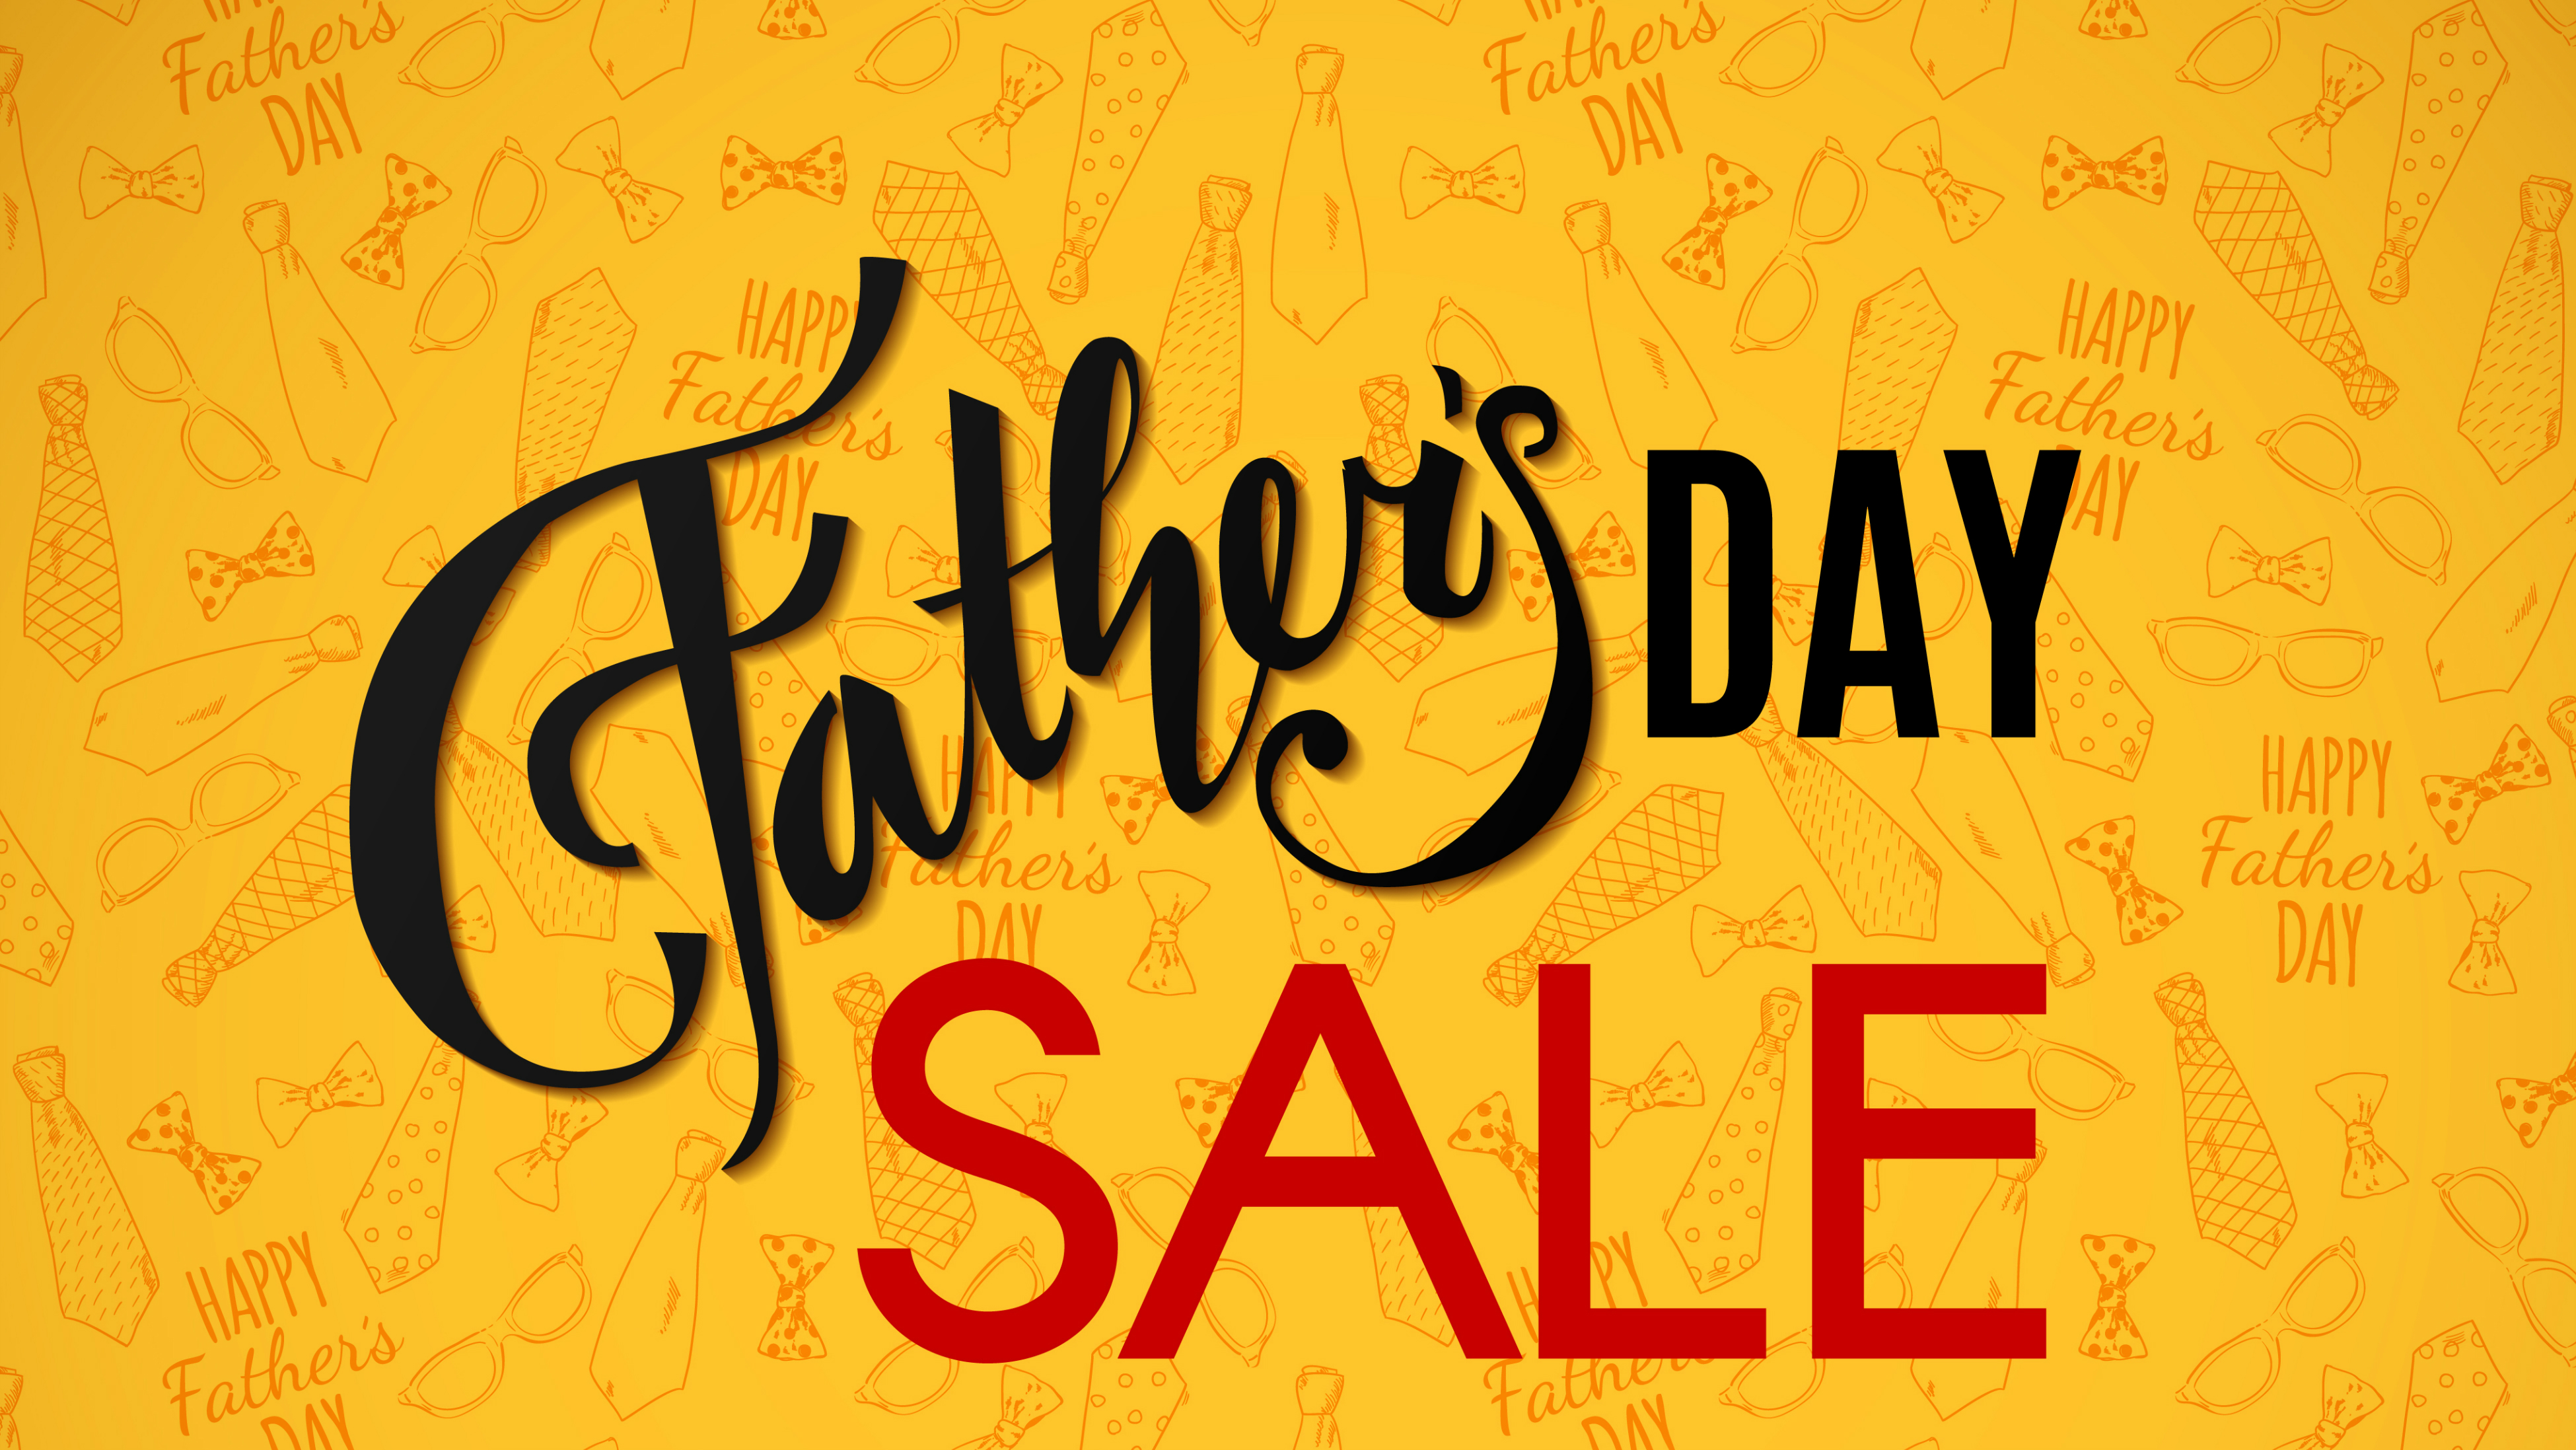 The Best Father S Day Sales 2020 Final Deals From Home Depot Best Buy Lowe S More Techradar A father's day gift lagavulin: the best father s day sales 2020 final